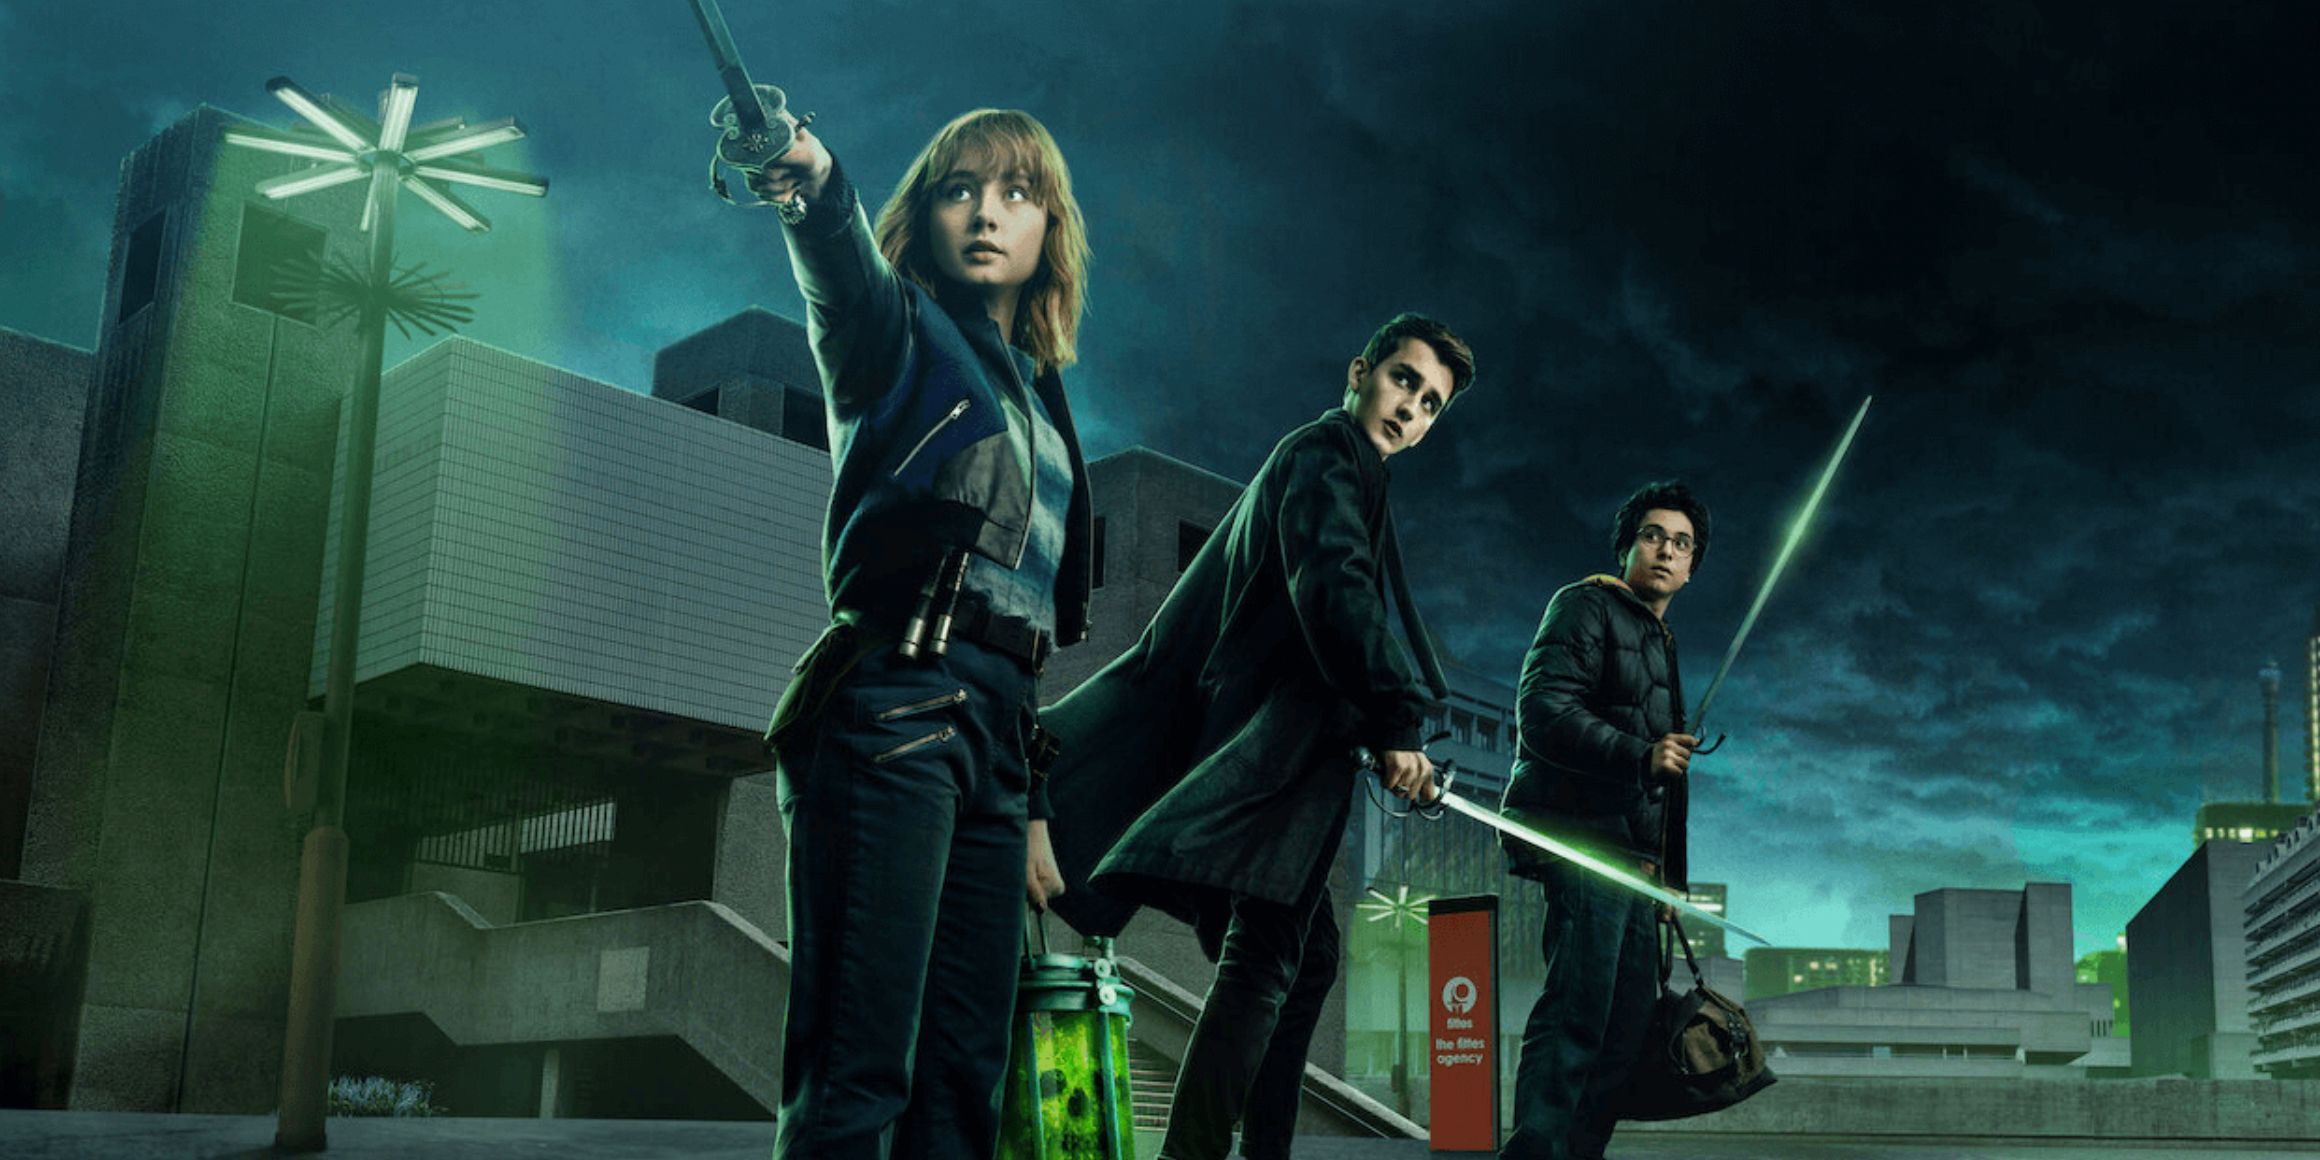 Three of the teens in Lockwood and Company holding swords while they look behind them in a Netflix promotional image